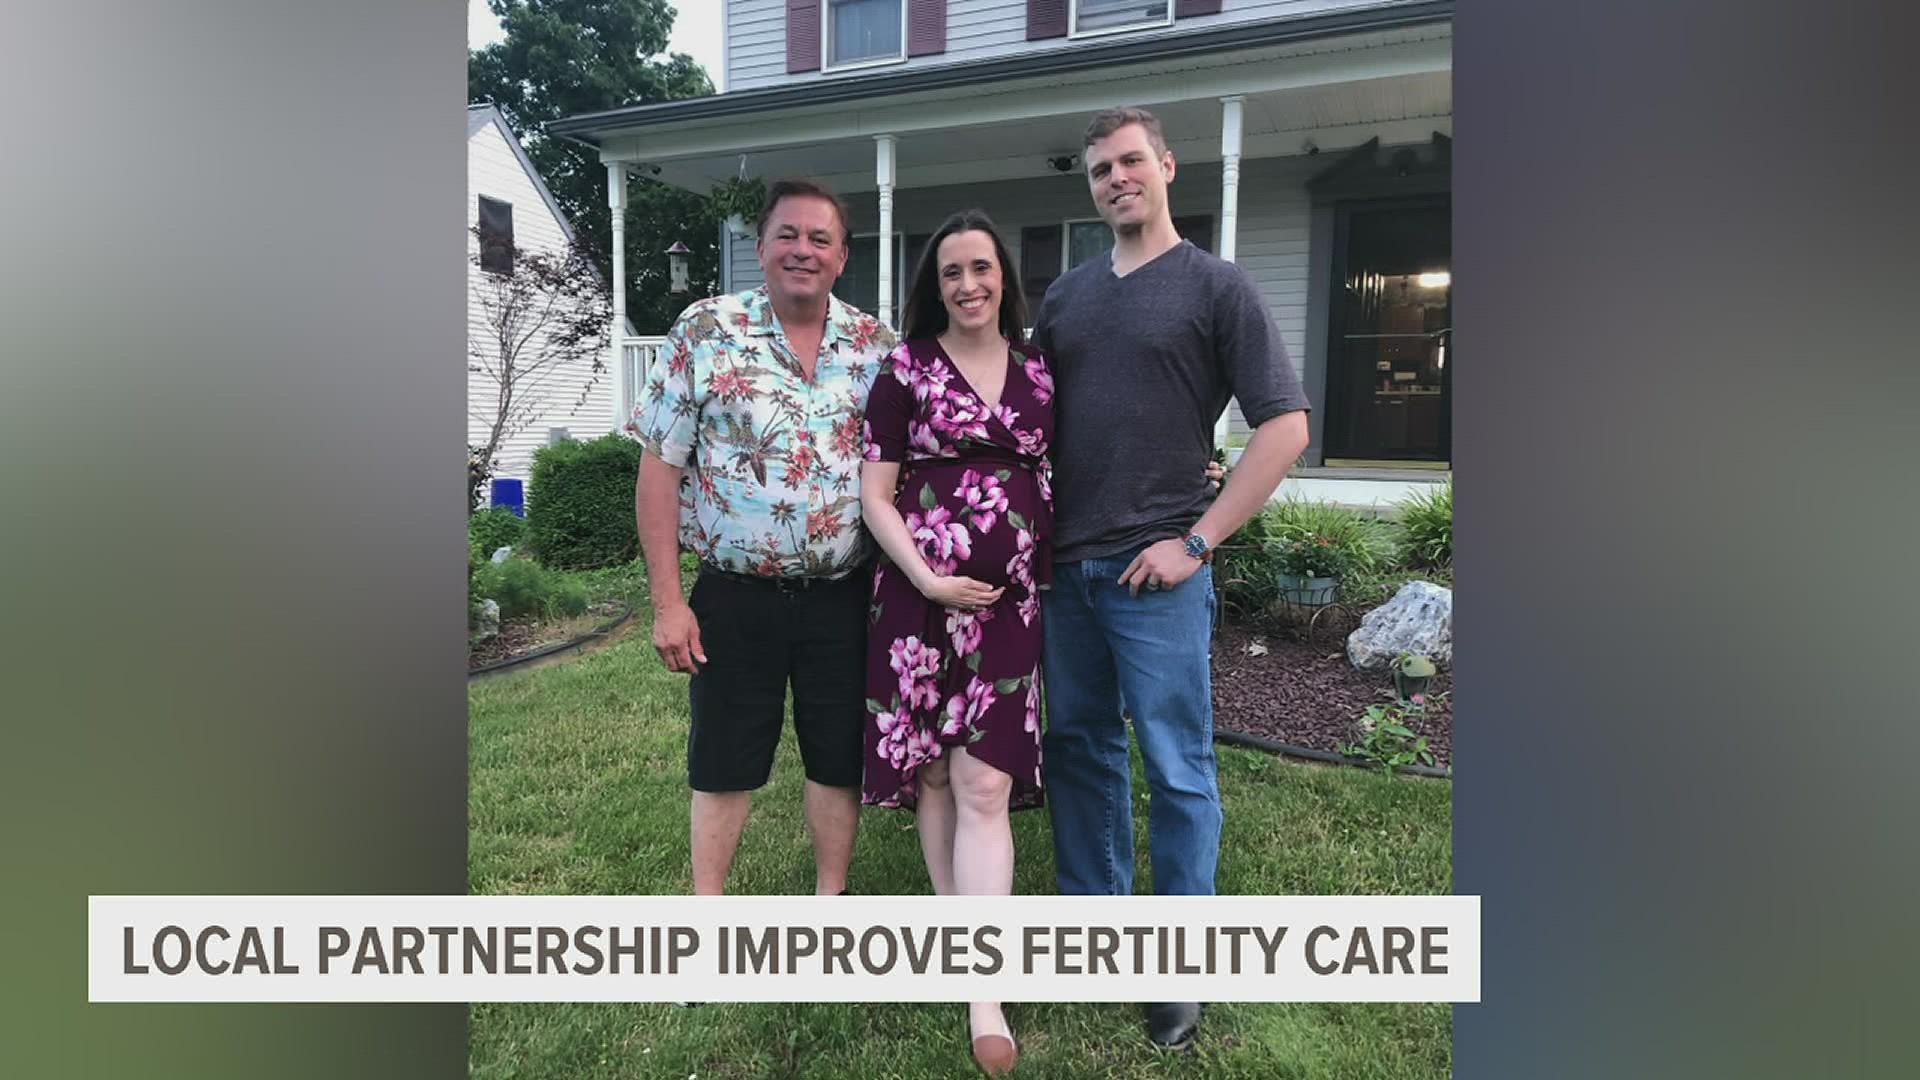 The collaboration will expand health and fertility services offered by WellSpan Fertility Care for patients who are having trouble conceiving.